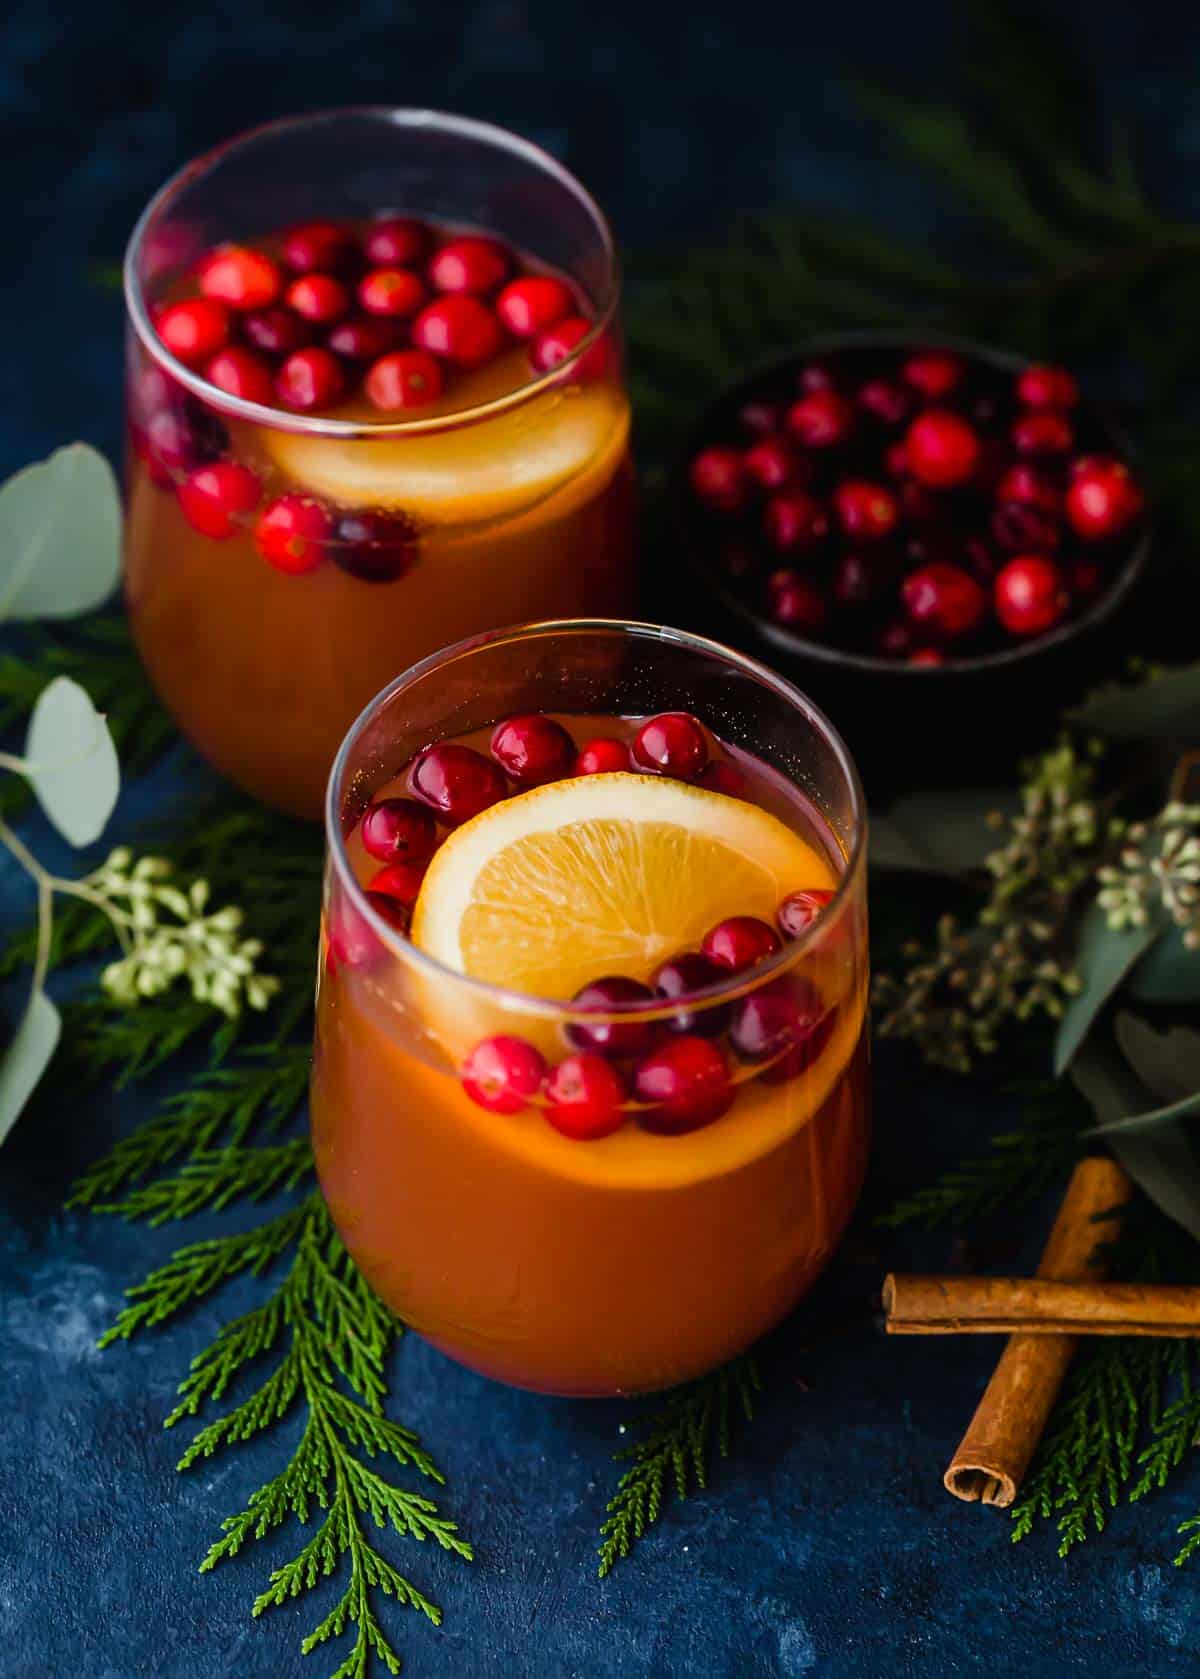 Two cups of Cranberry Apple Cider filled with fresh cranberries and orange slice on a dark blue background.